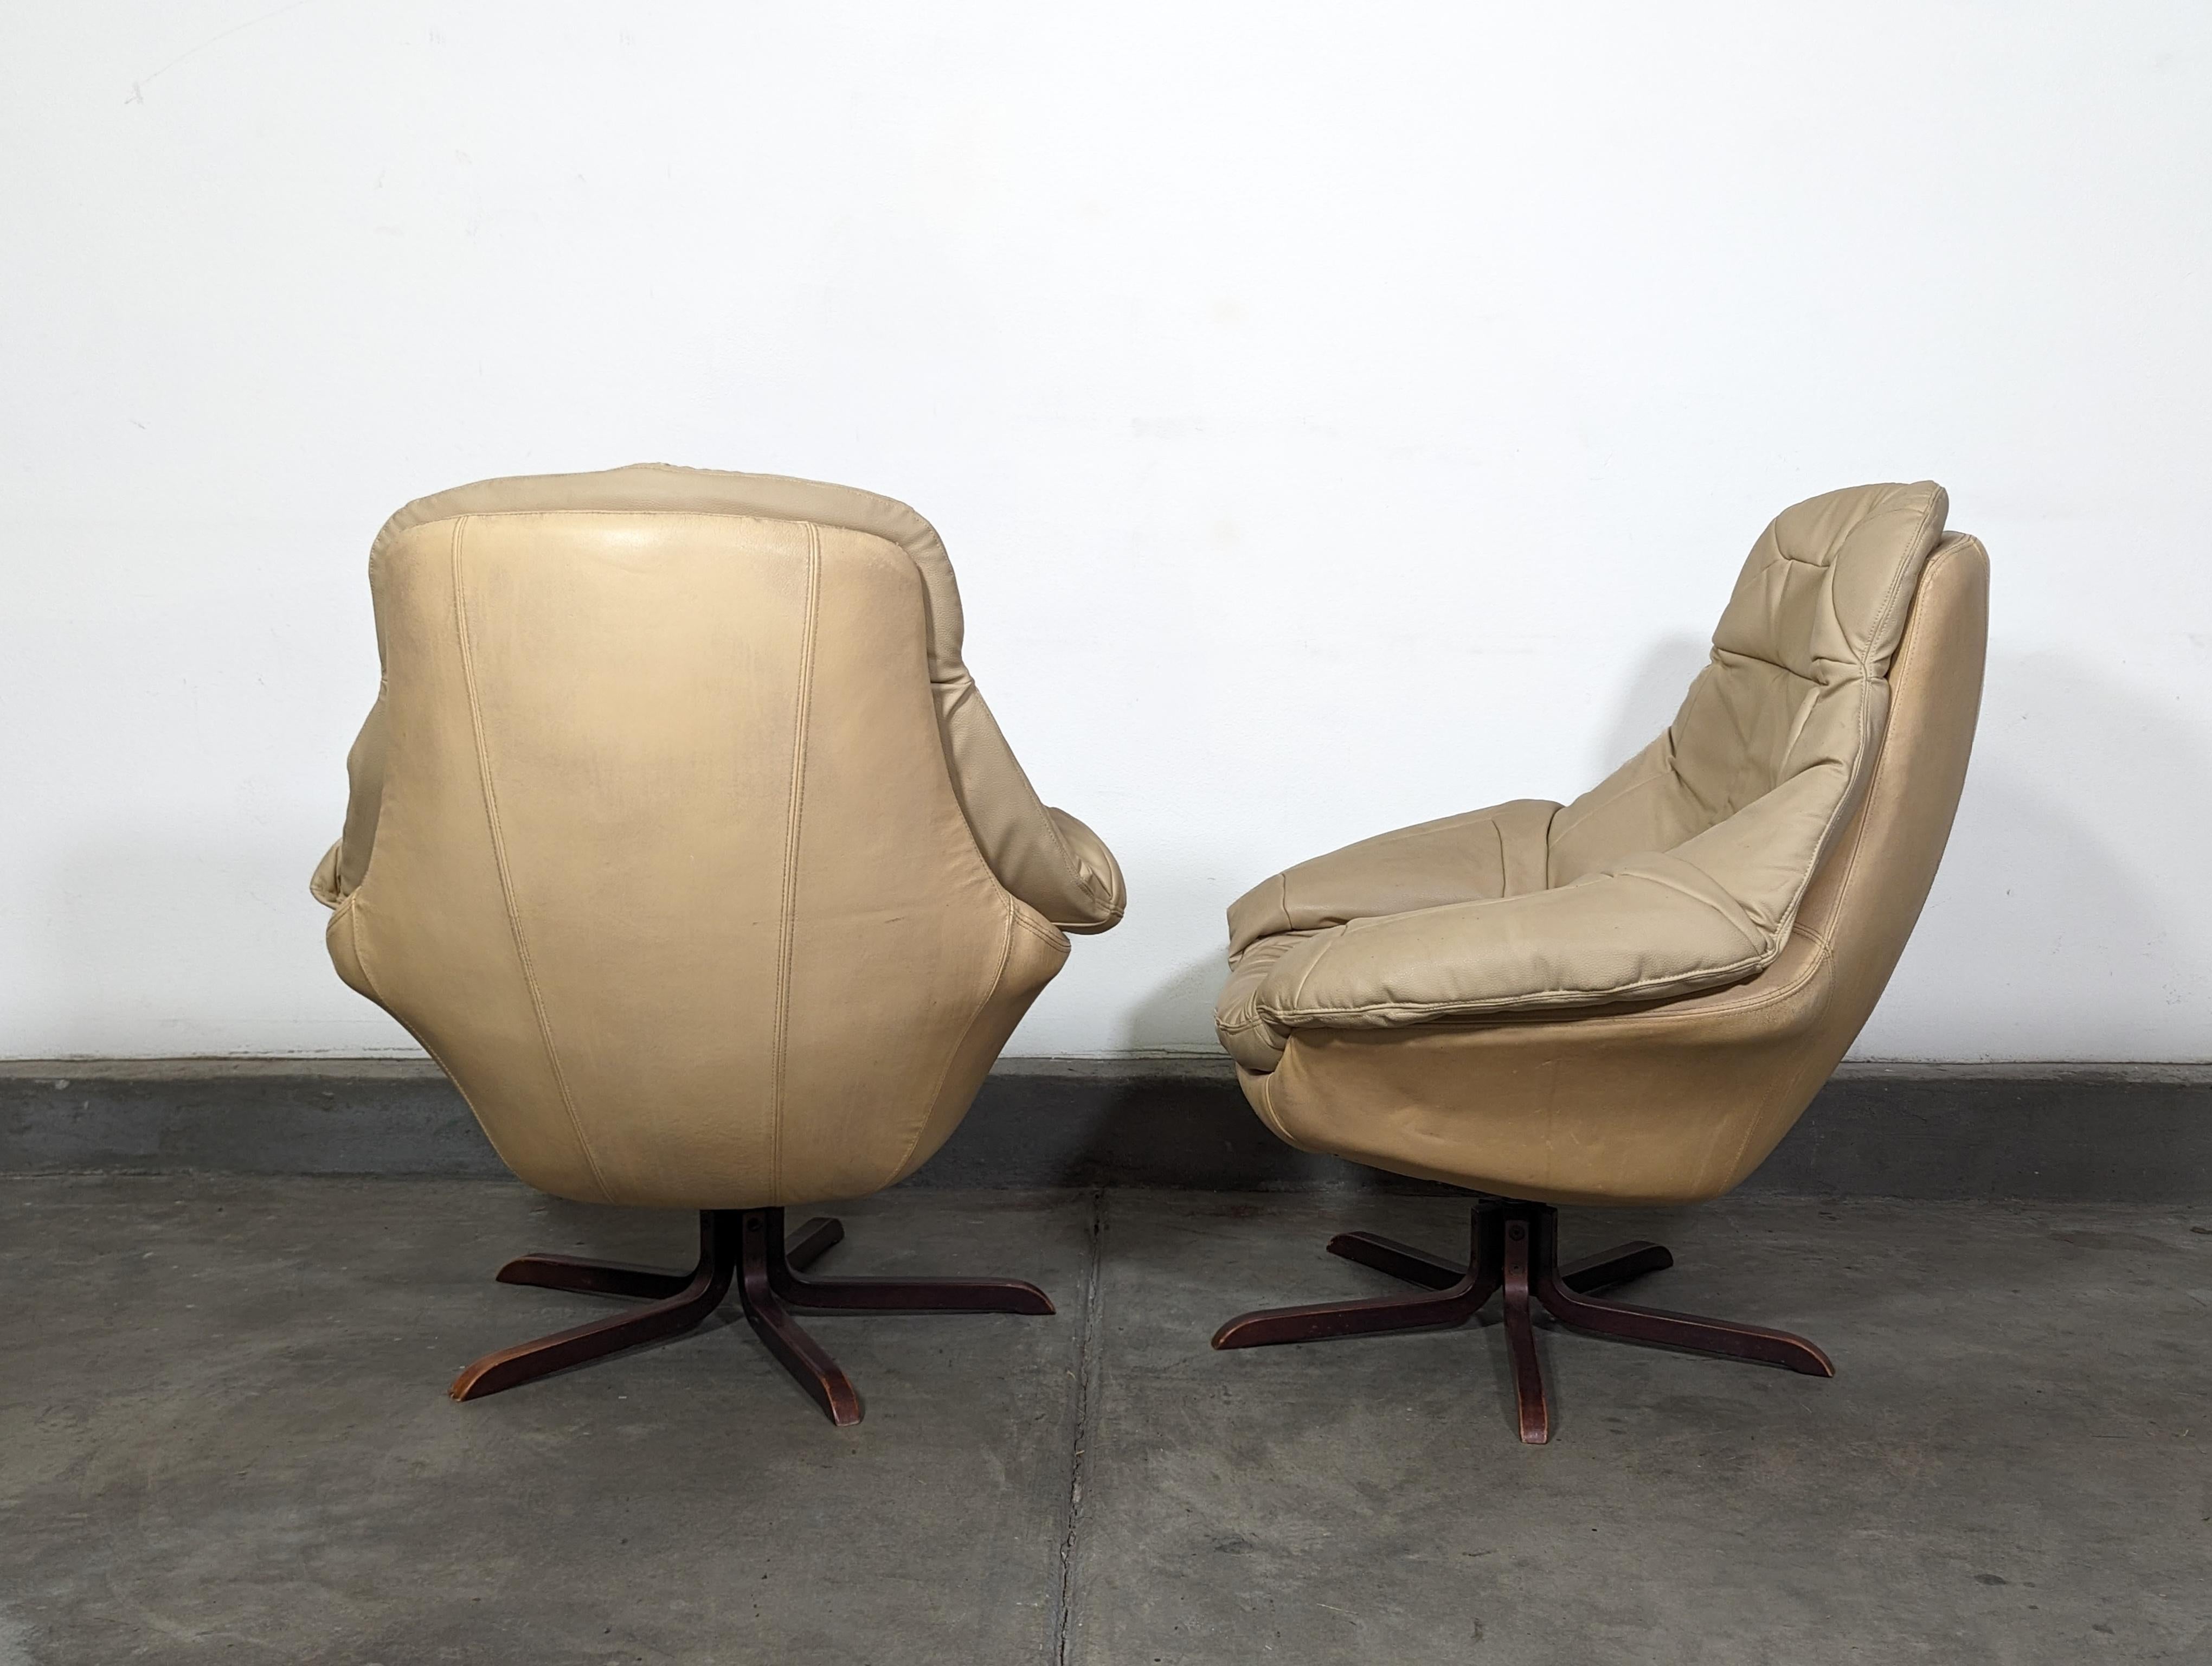 Danish Mid Century Modern Swivel Leather Lounge Chairs by H.W. Klein for Bramin, c1970s For Sale